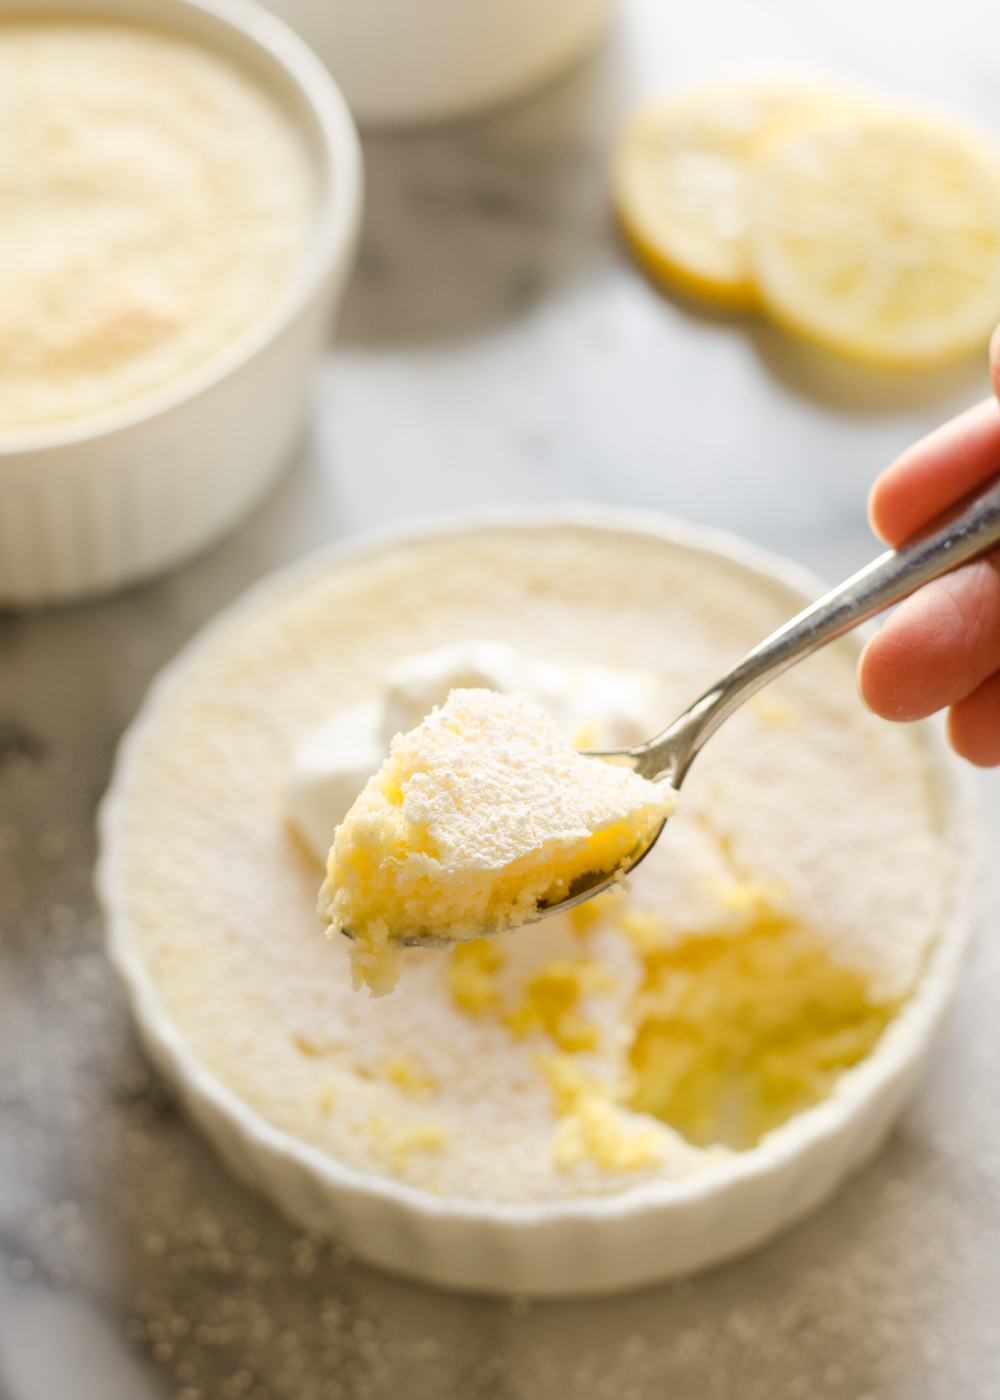 These fancy Lemon Soufflé Pudding Cakes are a single-serve dessert that takes less than an hour to make. The perfect date night mini dessert that’s also great for entertaining guests.